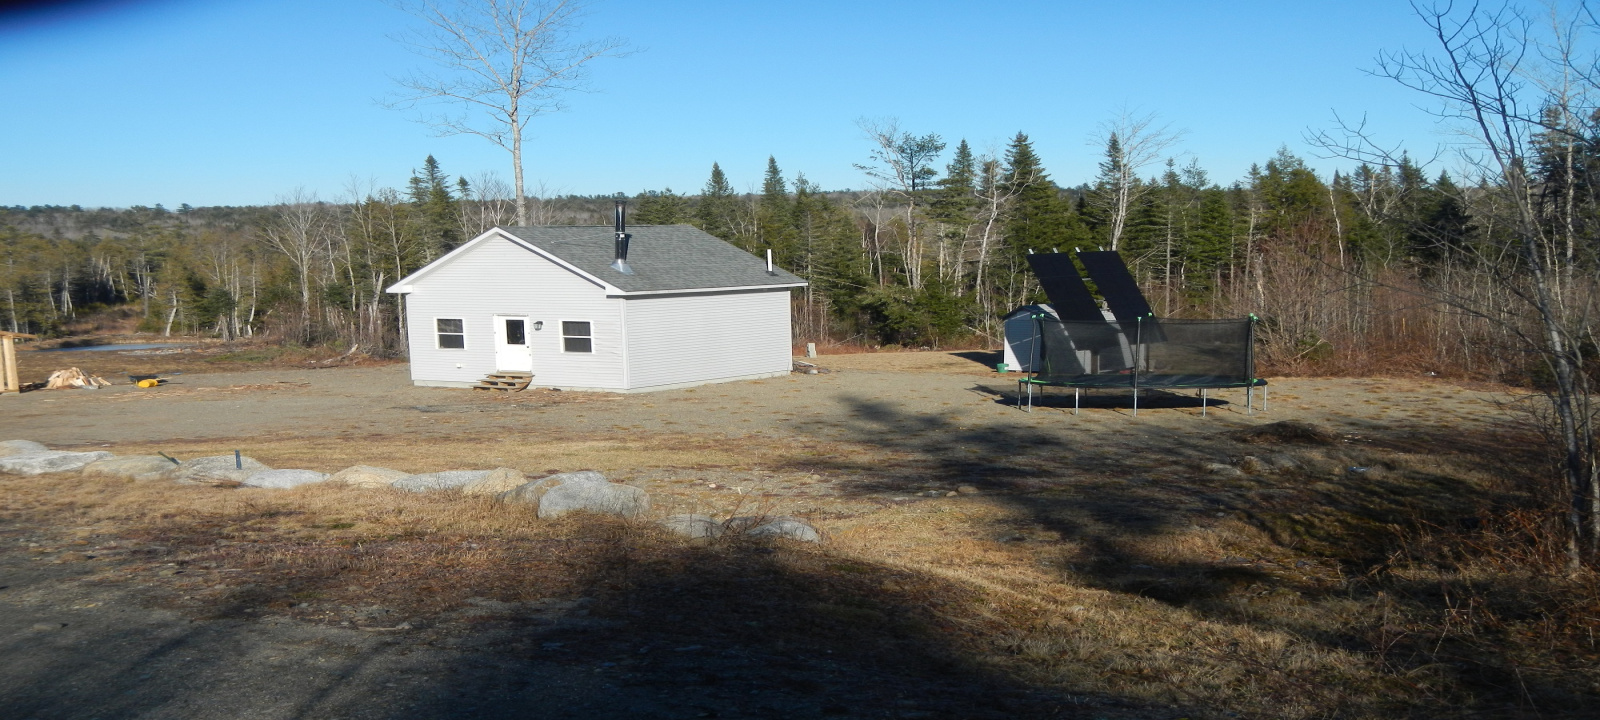 503 Caribou Road, Enfield, Maine 04493, 2 Bedrooms Bedrooms, 3 Rooms Rooms,1 BathroomBathrooms,Waterfront Camp/House,Pending/ Under Contract,Caribou,1016